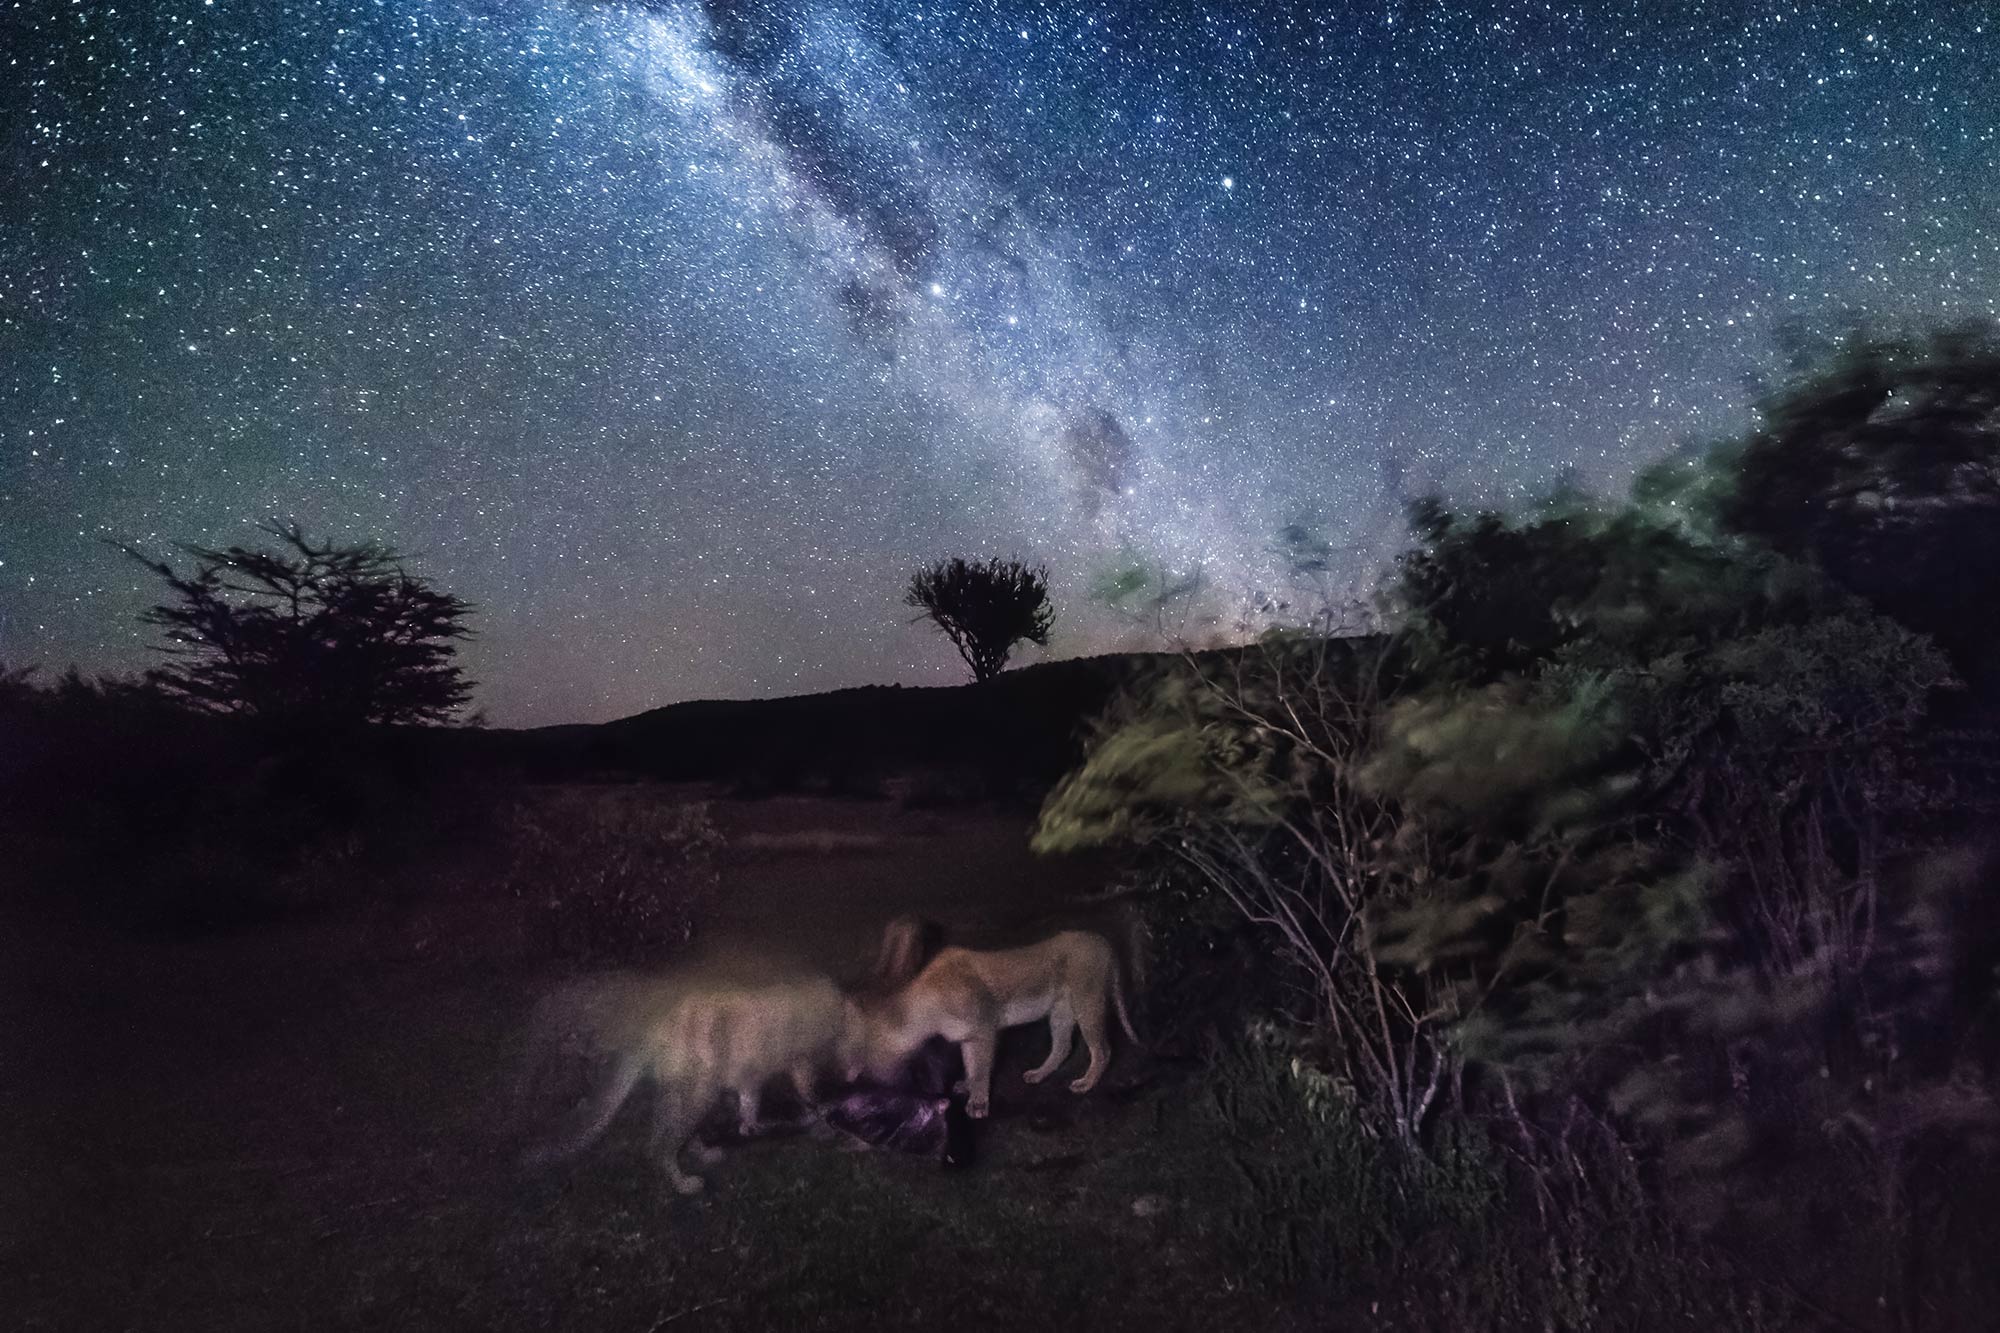 Lions eating prey under the stars